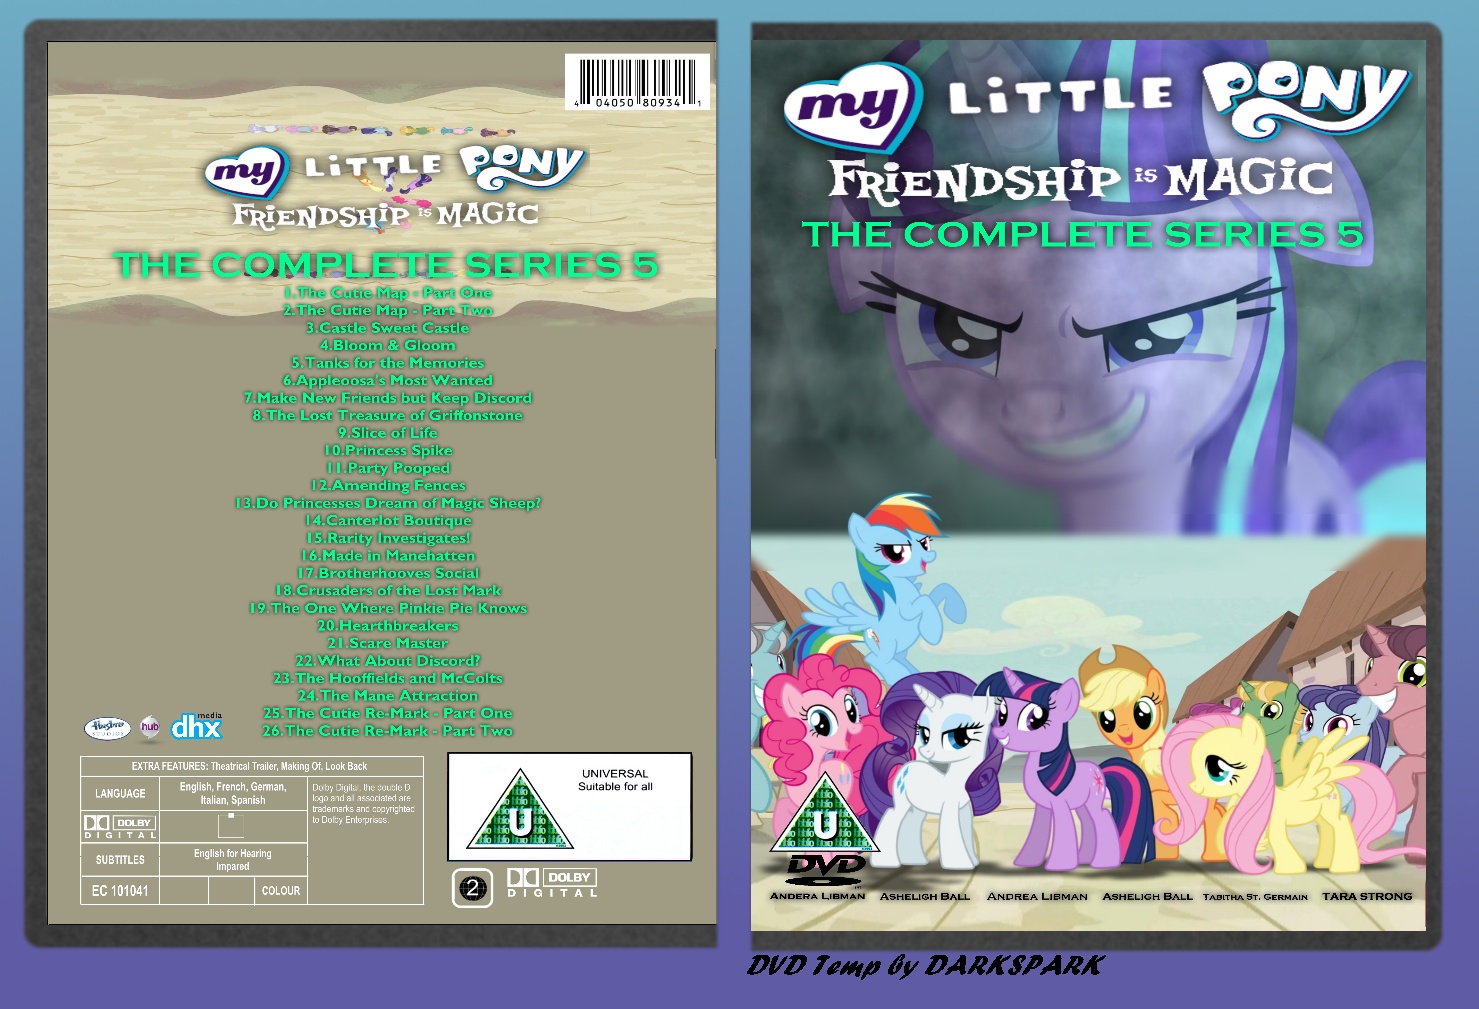 My Little Pony: Friendship is Magic: Series 5 box cover